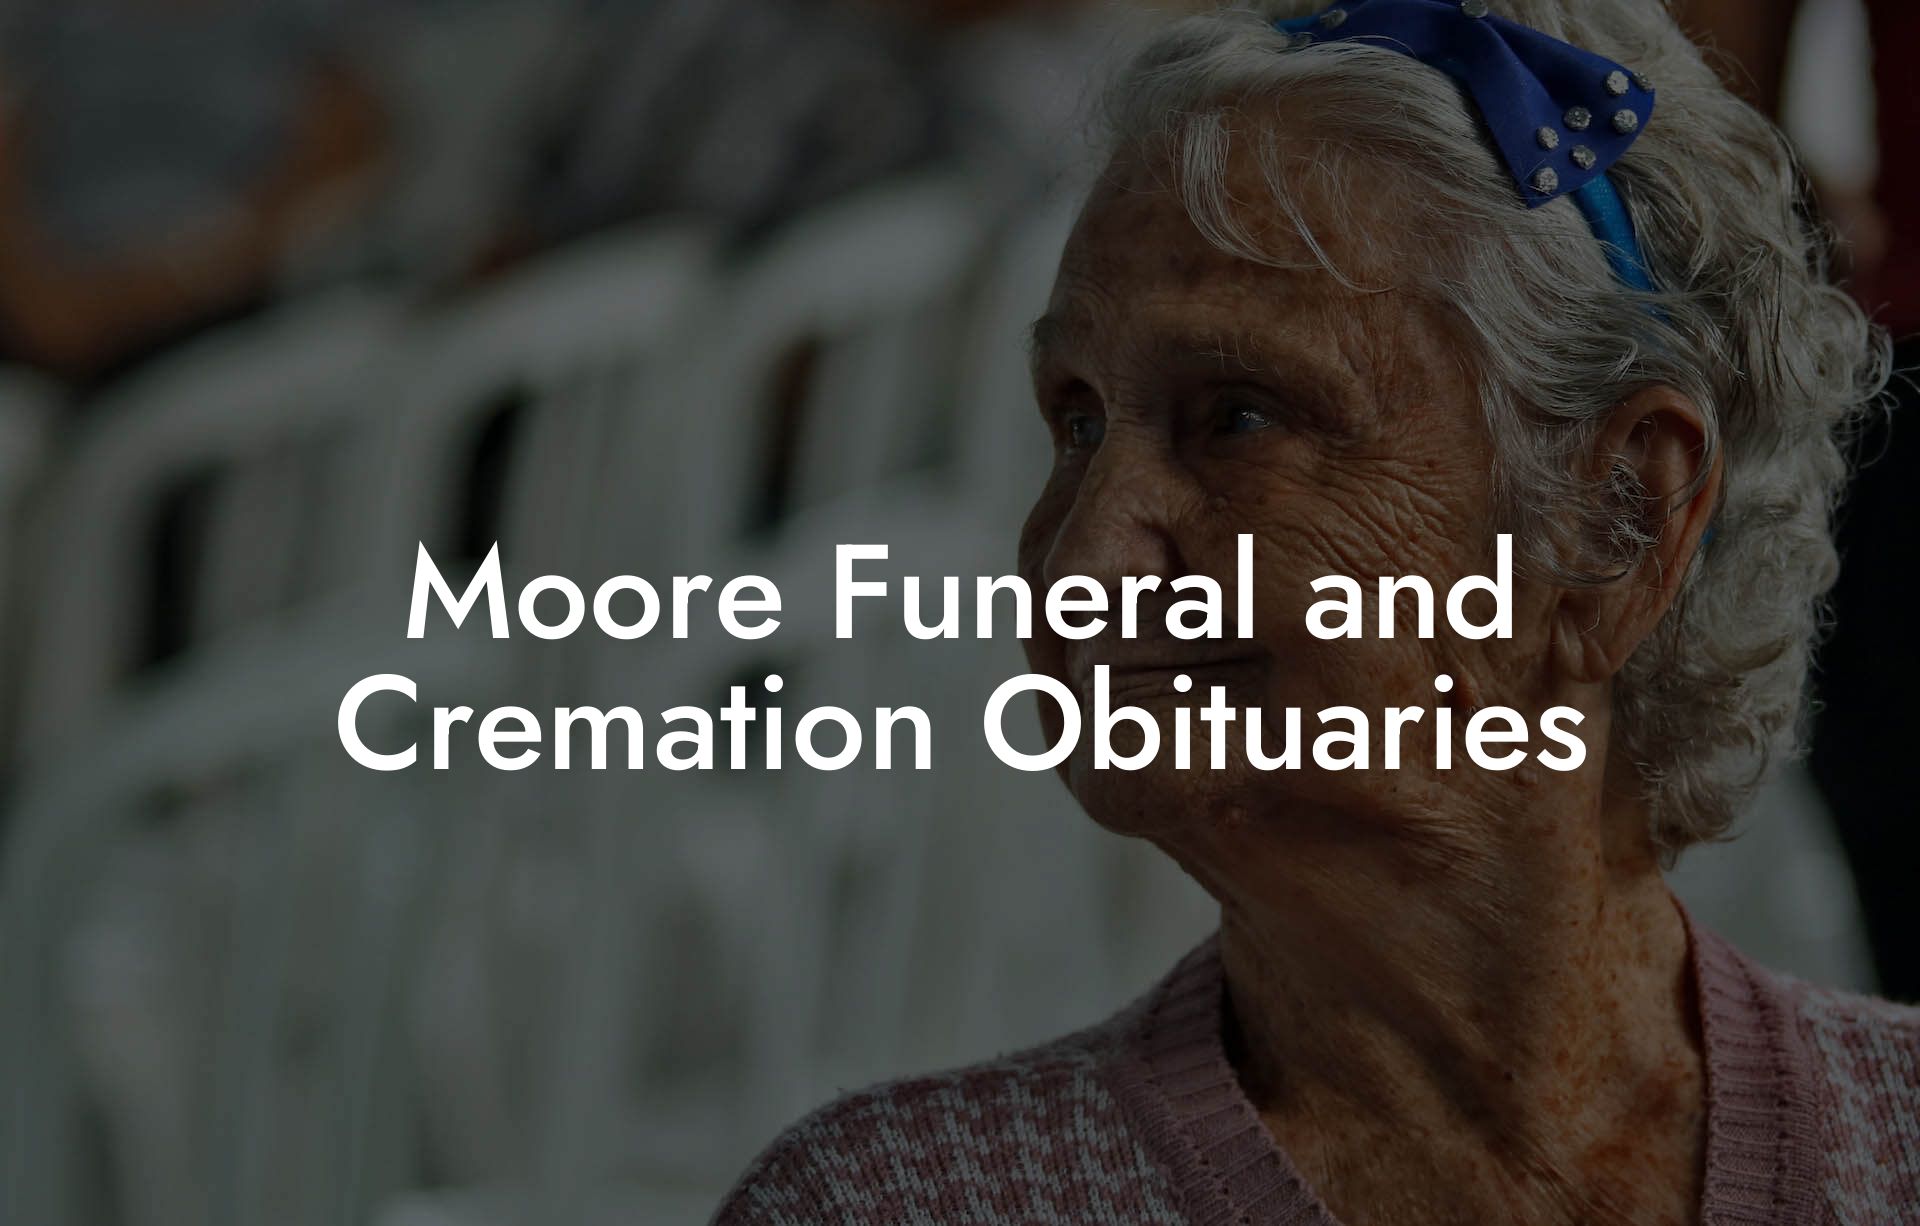 Moore Funeral and Cremation Obituaries